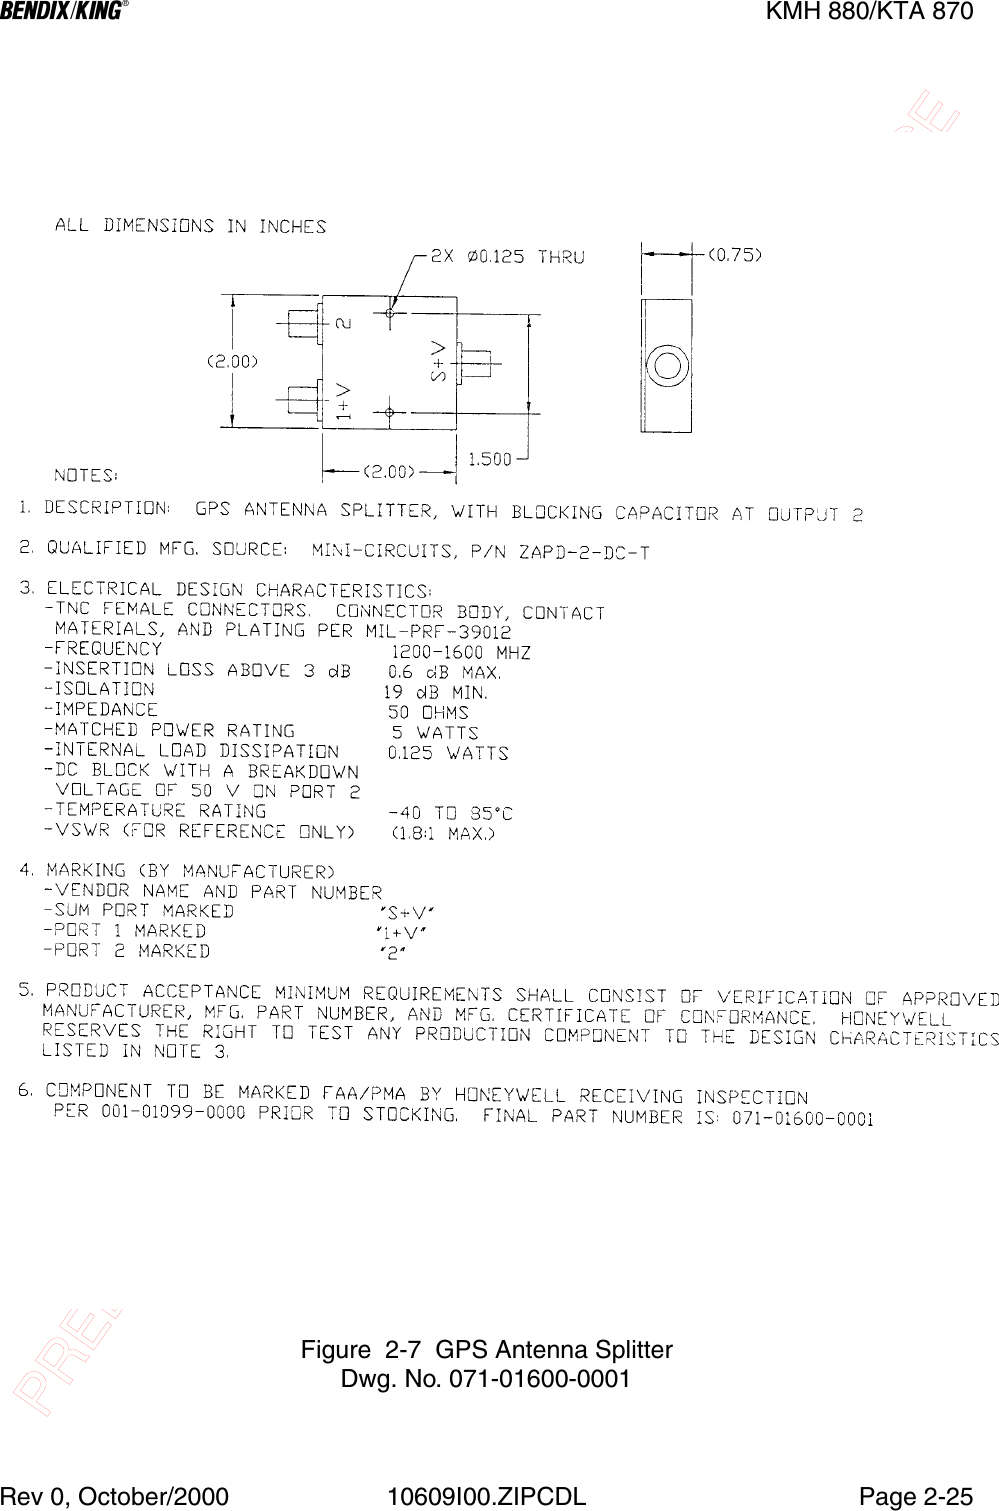 PRELIMINARY - SUBJECT TO CHANGE WITHOUT NOTICEBKMH 880/KTA 870Rev 0, October/2000 10609I00.ZIPCDL Page 2-25Figure  2-7  GPS Antenna SplitterDwg. No. 071-01600-0001